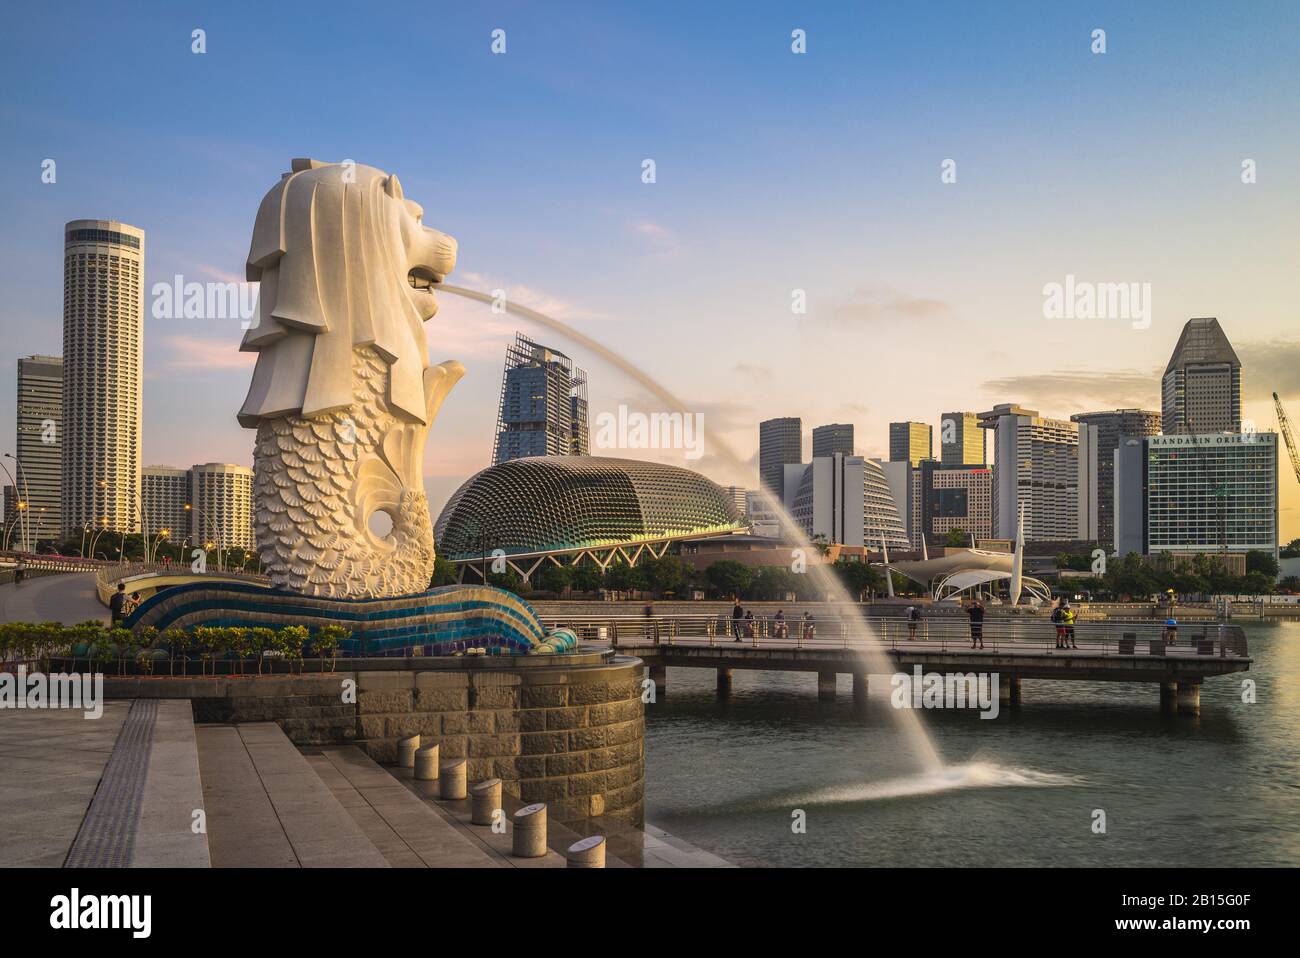 Singapore, Singapore - February 6, 2020: Merlion Statue at Marina Bay, a mythical creature with a lion's head and the body of a fish Stock Photo